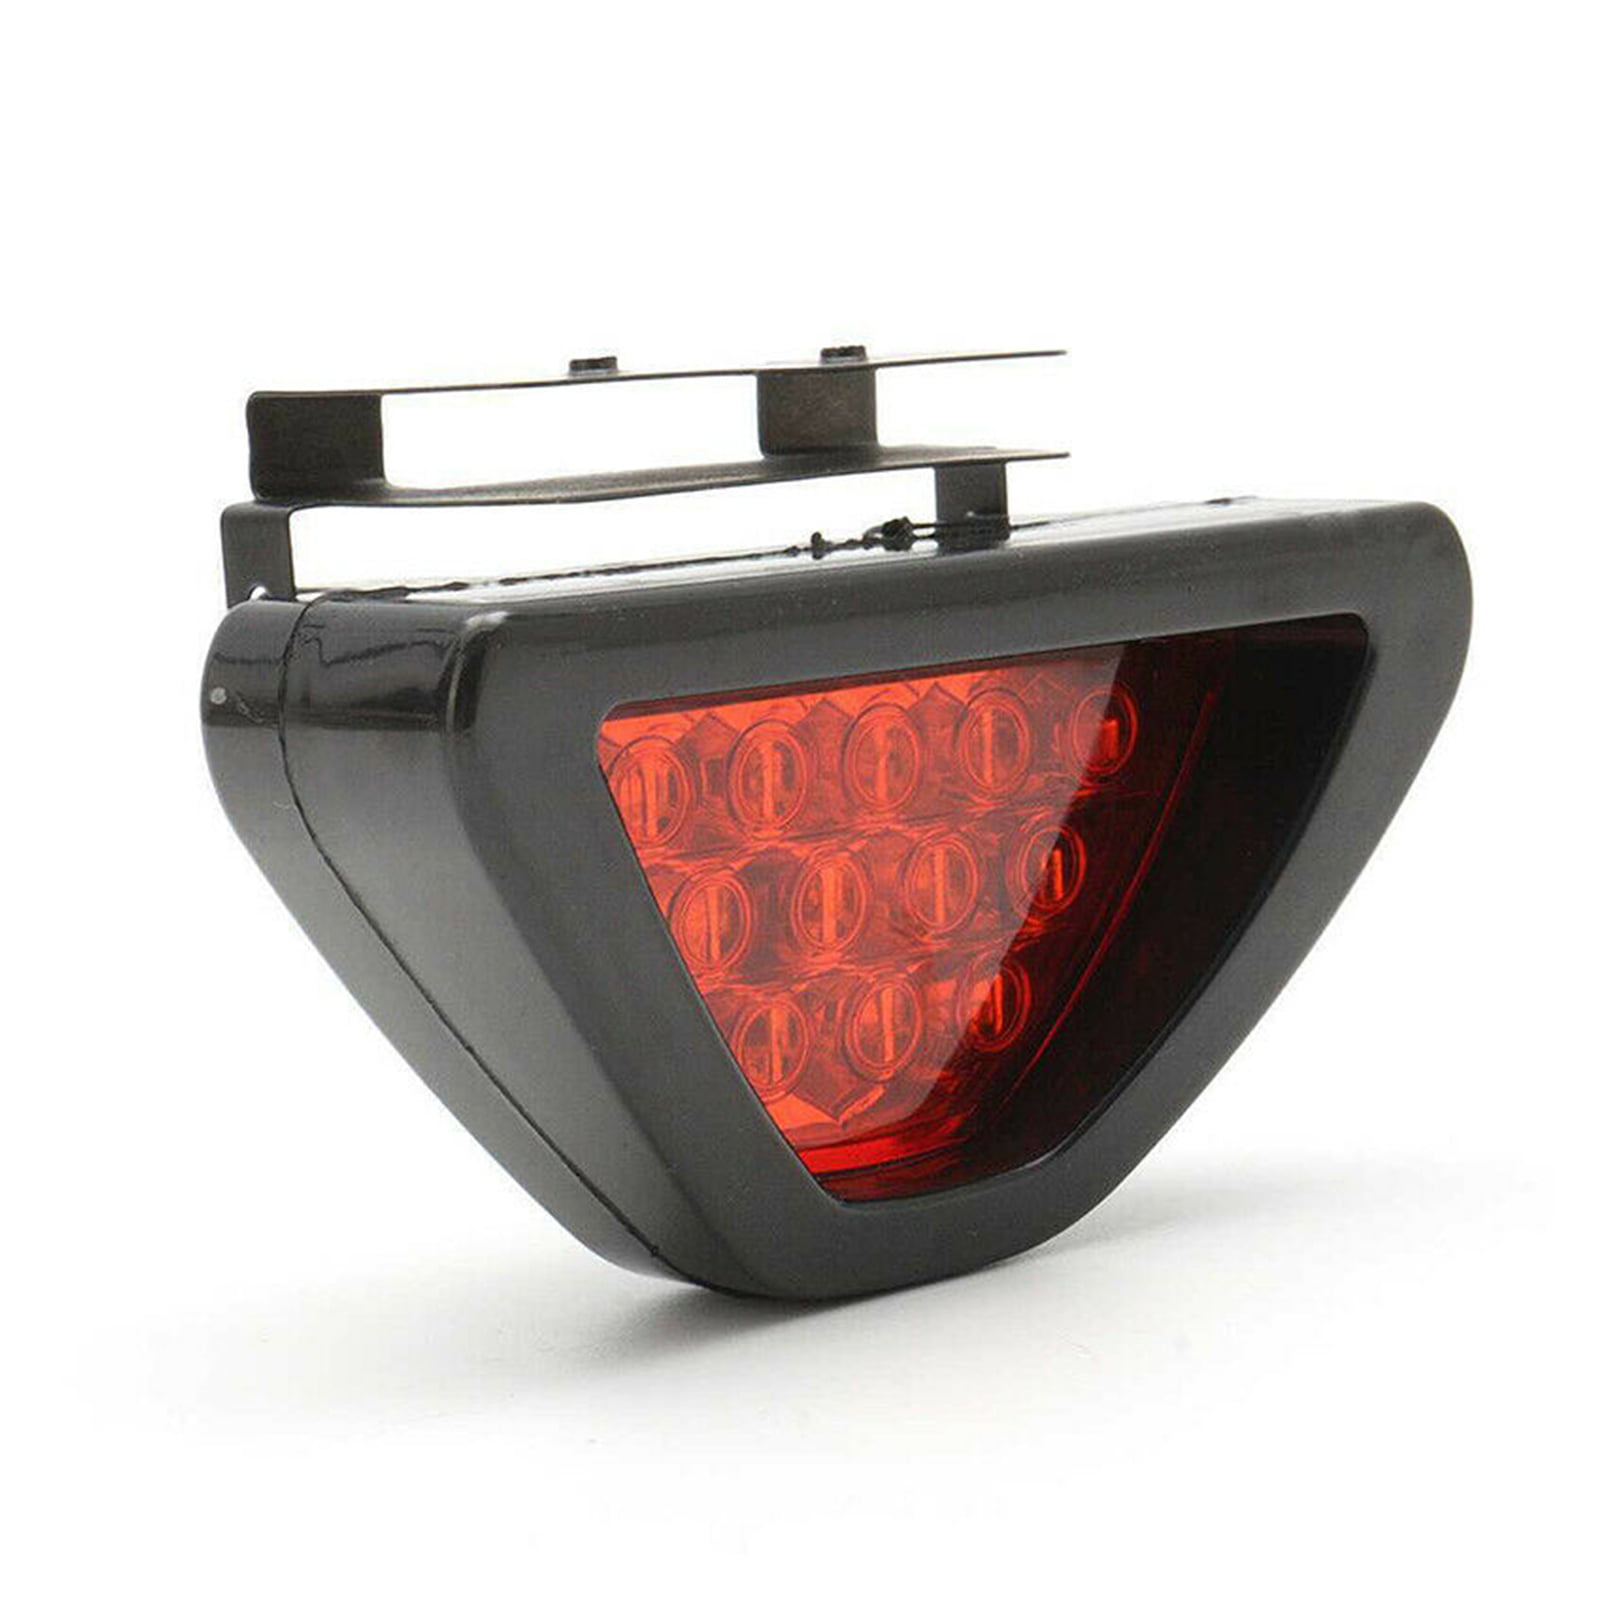 Super Bright F1 Style 12 LED Clamp Flash Mount Strobe 3rd Third Blinking Triangle Taillamp Stop Light Red Len 